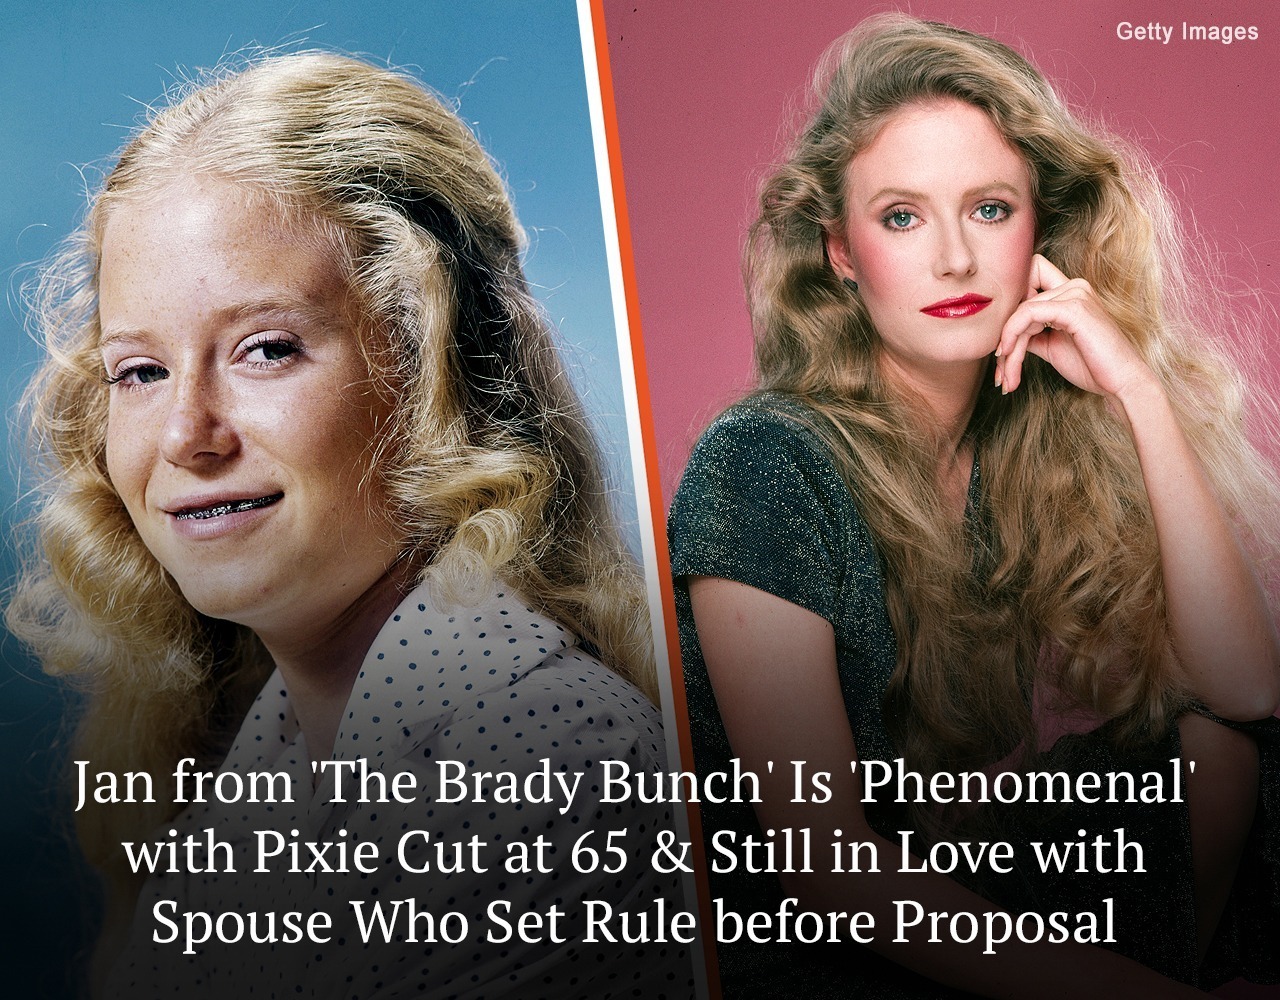 Jan From ‘The Brady Bunch’ Is ‘Phenomenal’ With Pixie Cut at 65 & Loves Spouse Who Set Rule Before Proposal